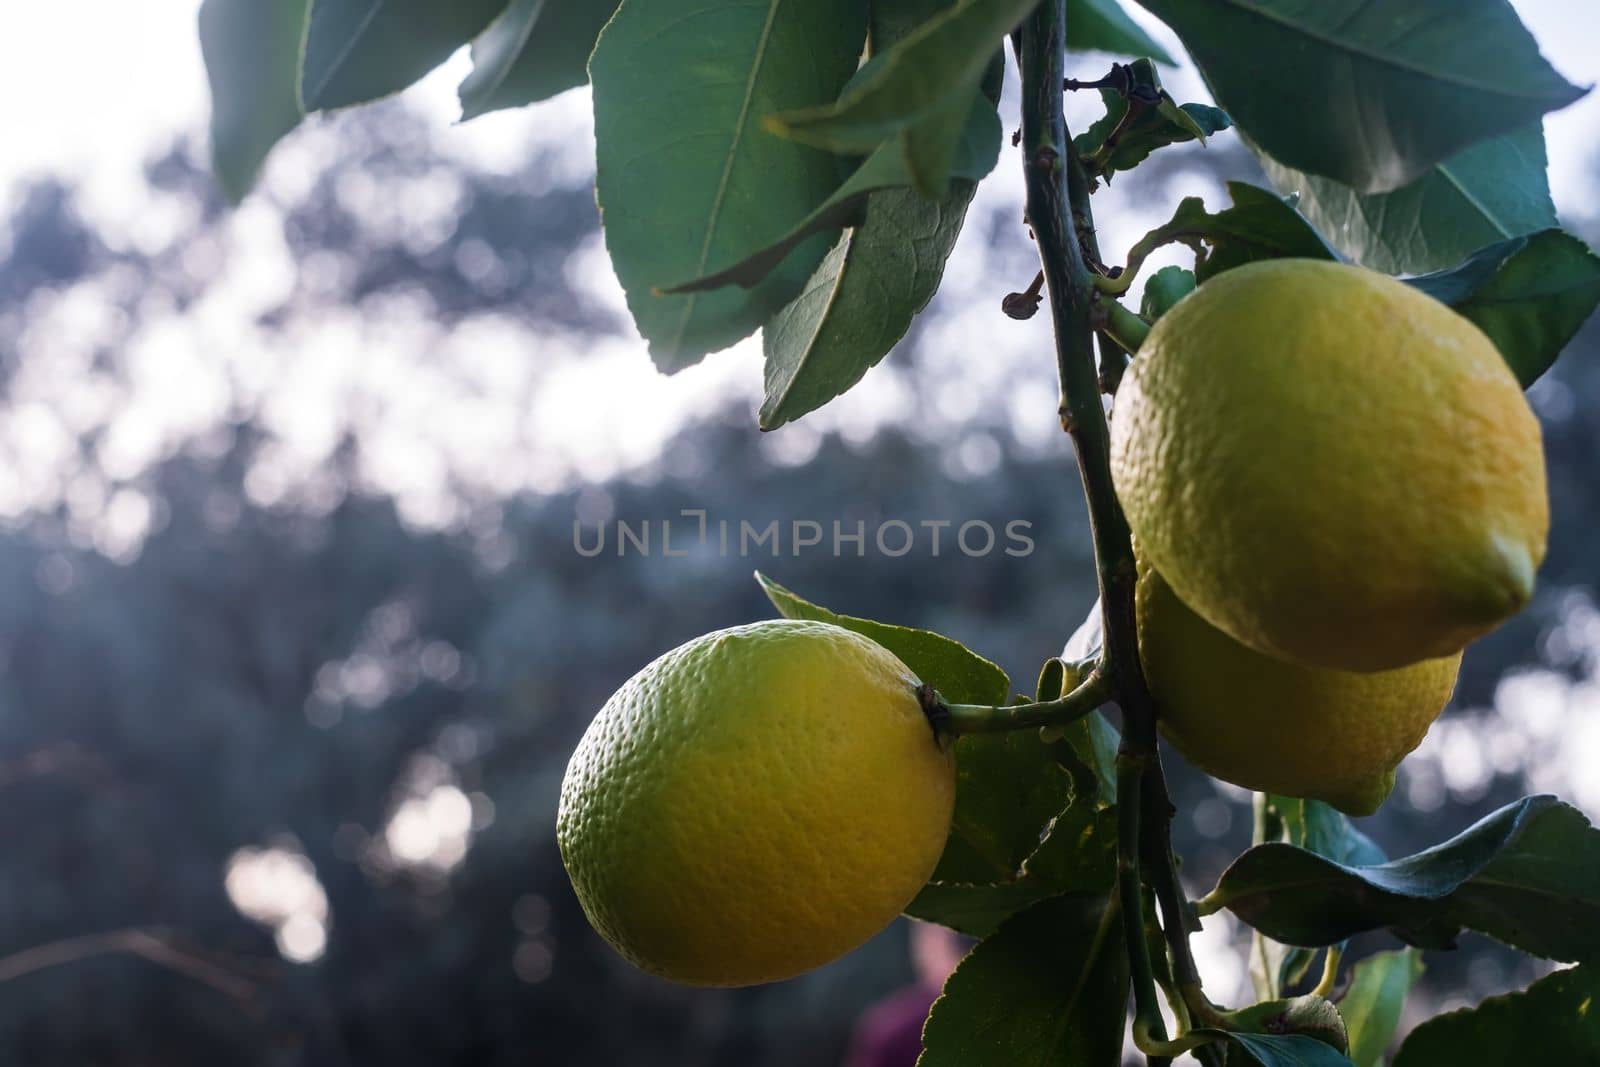 Close up of Lemons hanging from a tree in a lemon grove. High quality photo